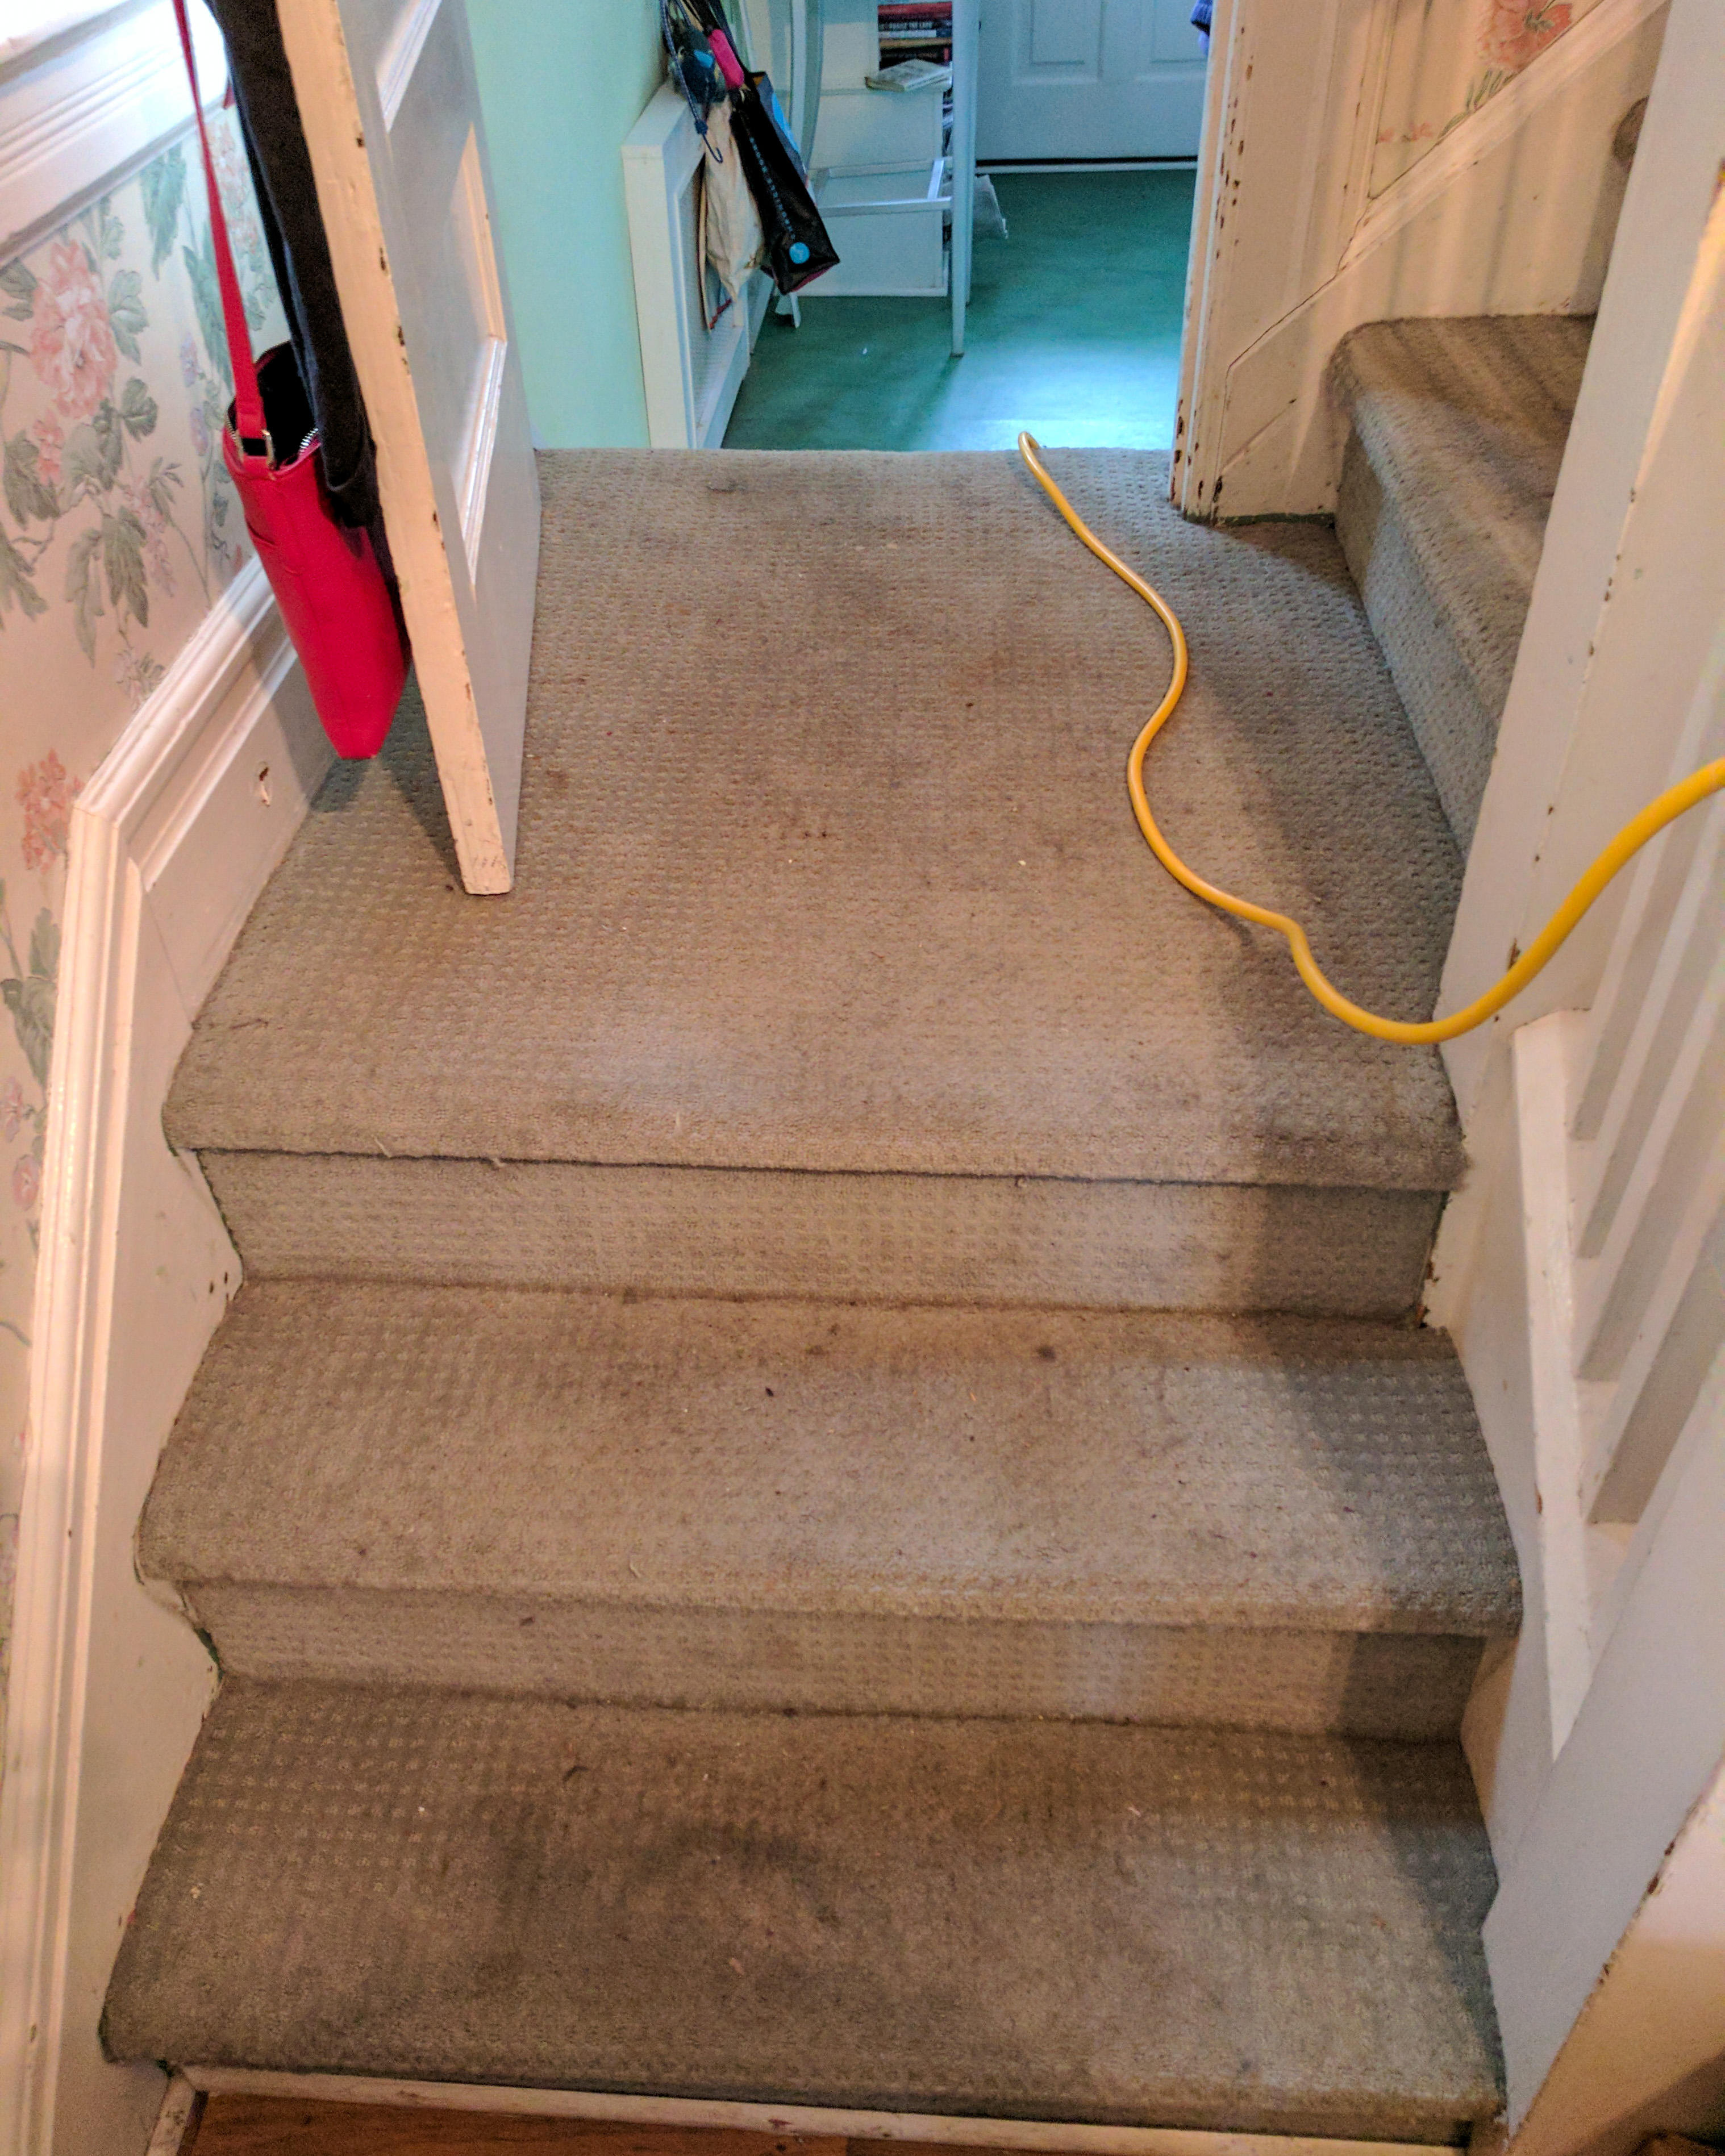 SERVPRO of Montclair/ West Orange can assist if you have water damage in Llewellyn Park, NJ. PHONE NOW: